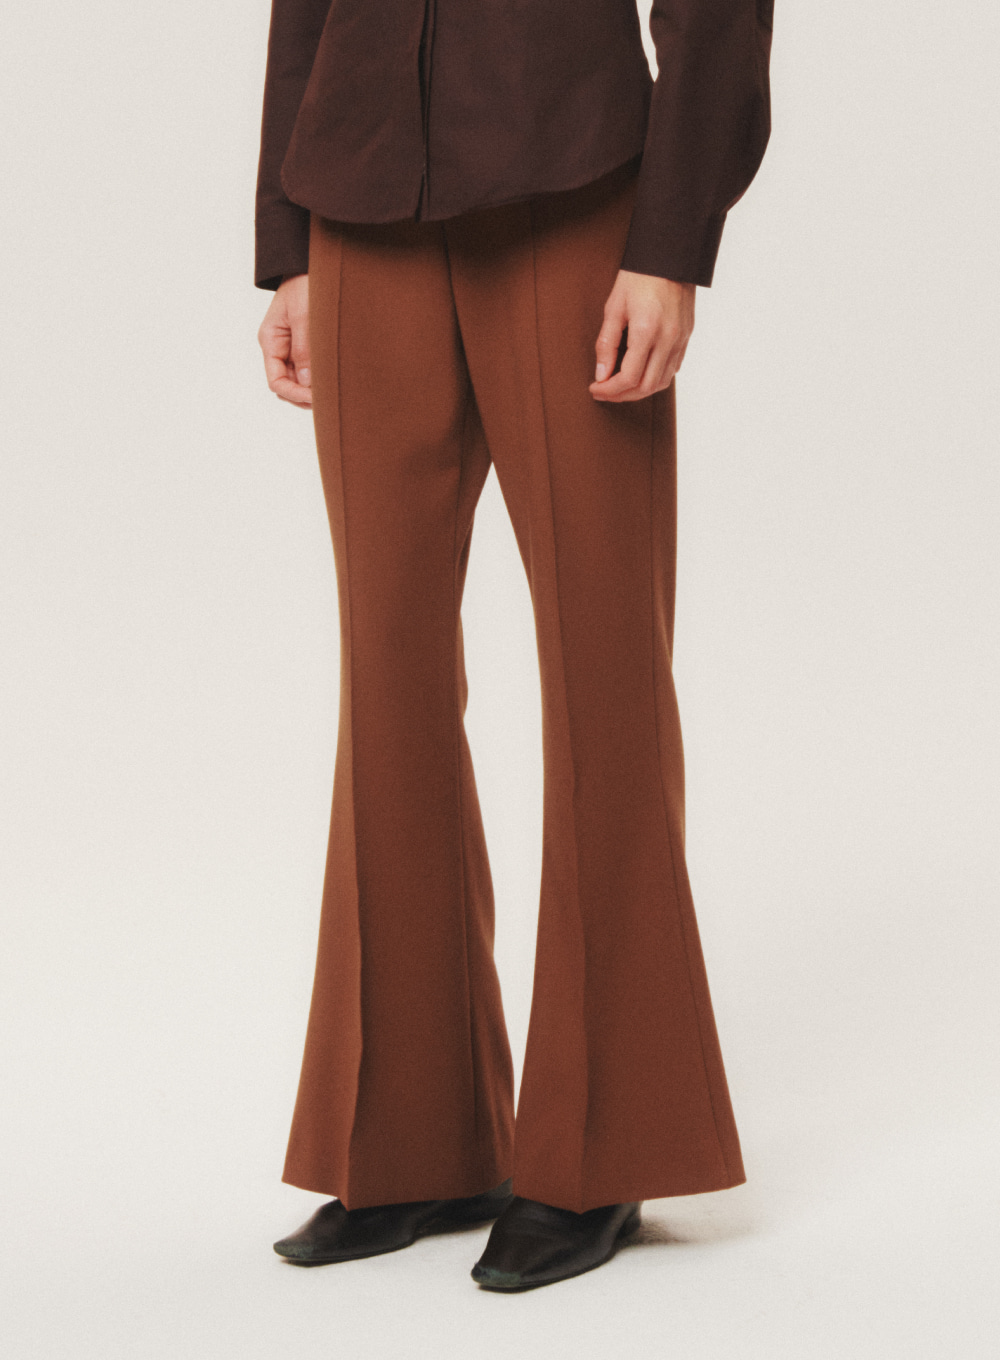 Brill Twill Flare Pants - Toffee Brown